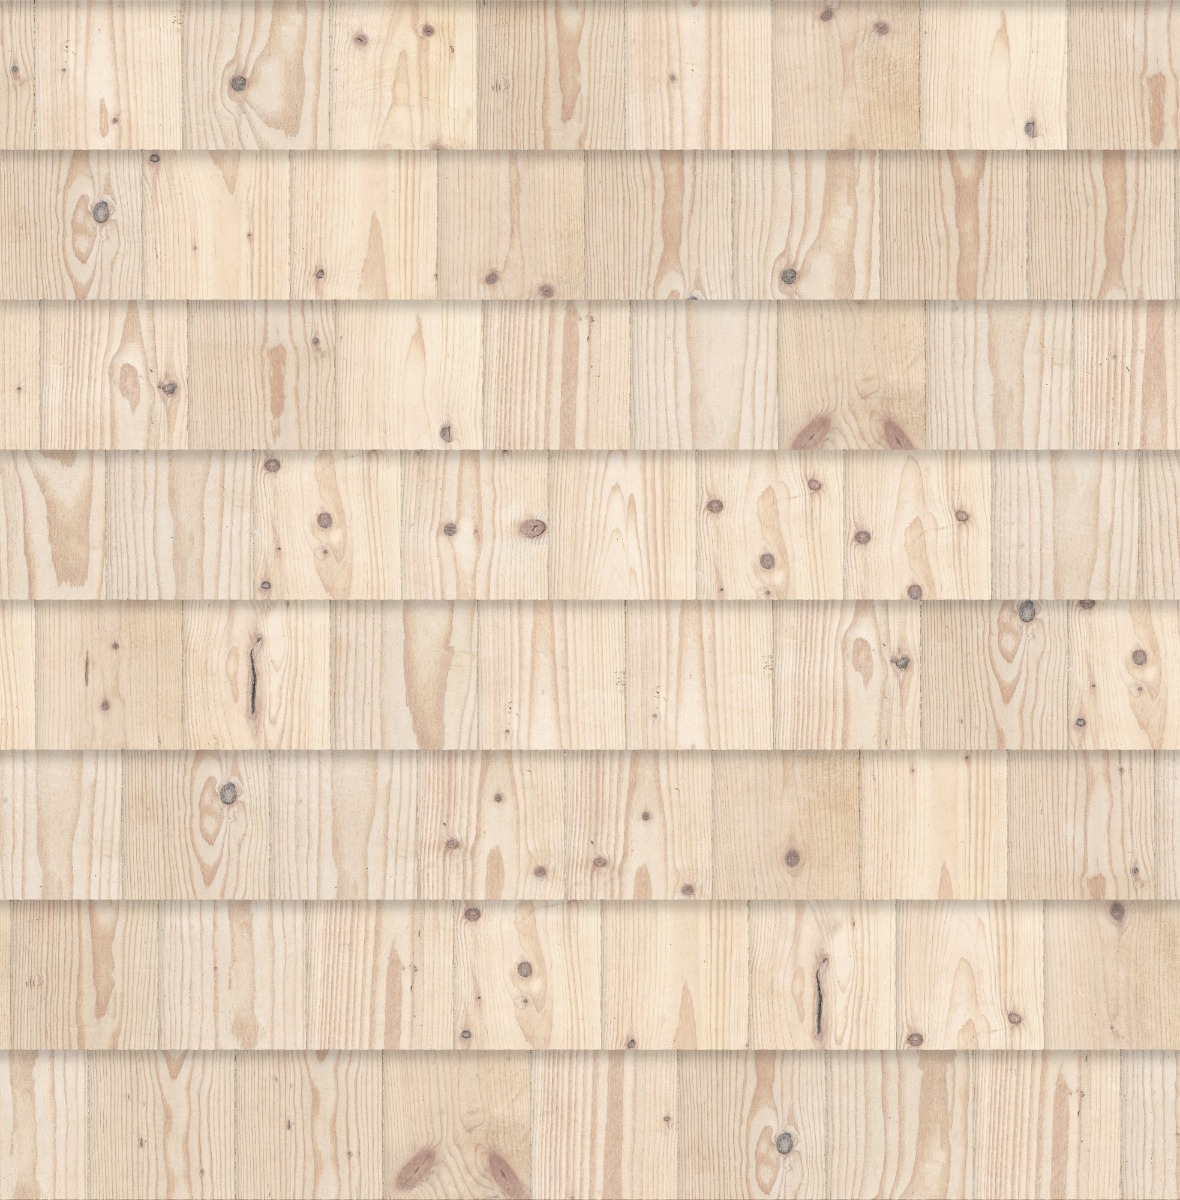 A seamless wood texture with oiled pine boards arranged in a Staggered pattern